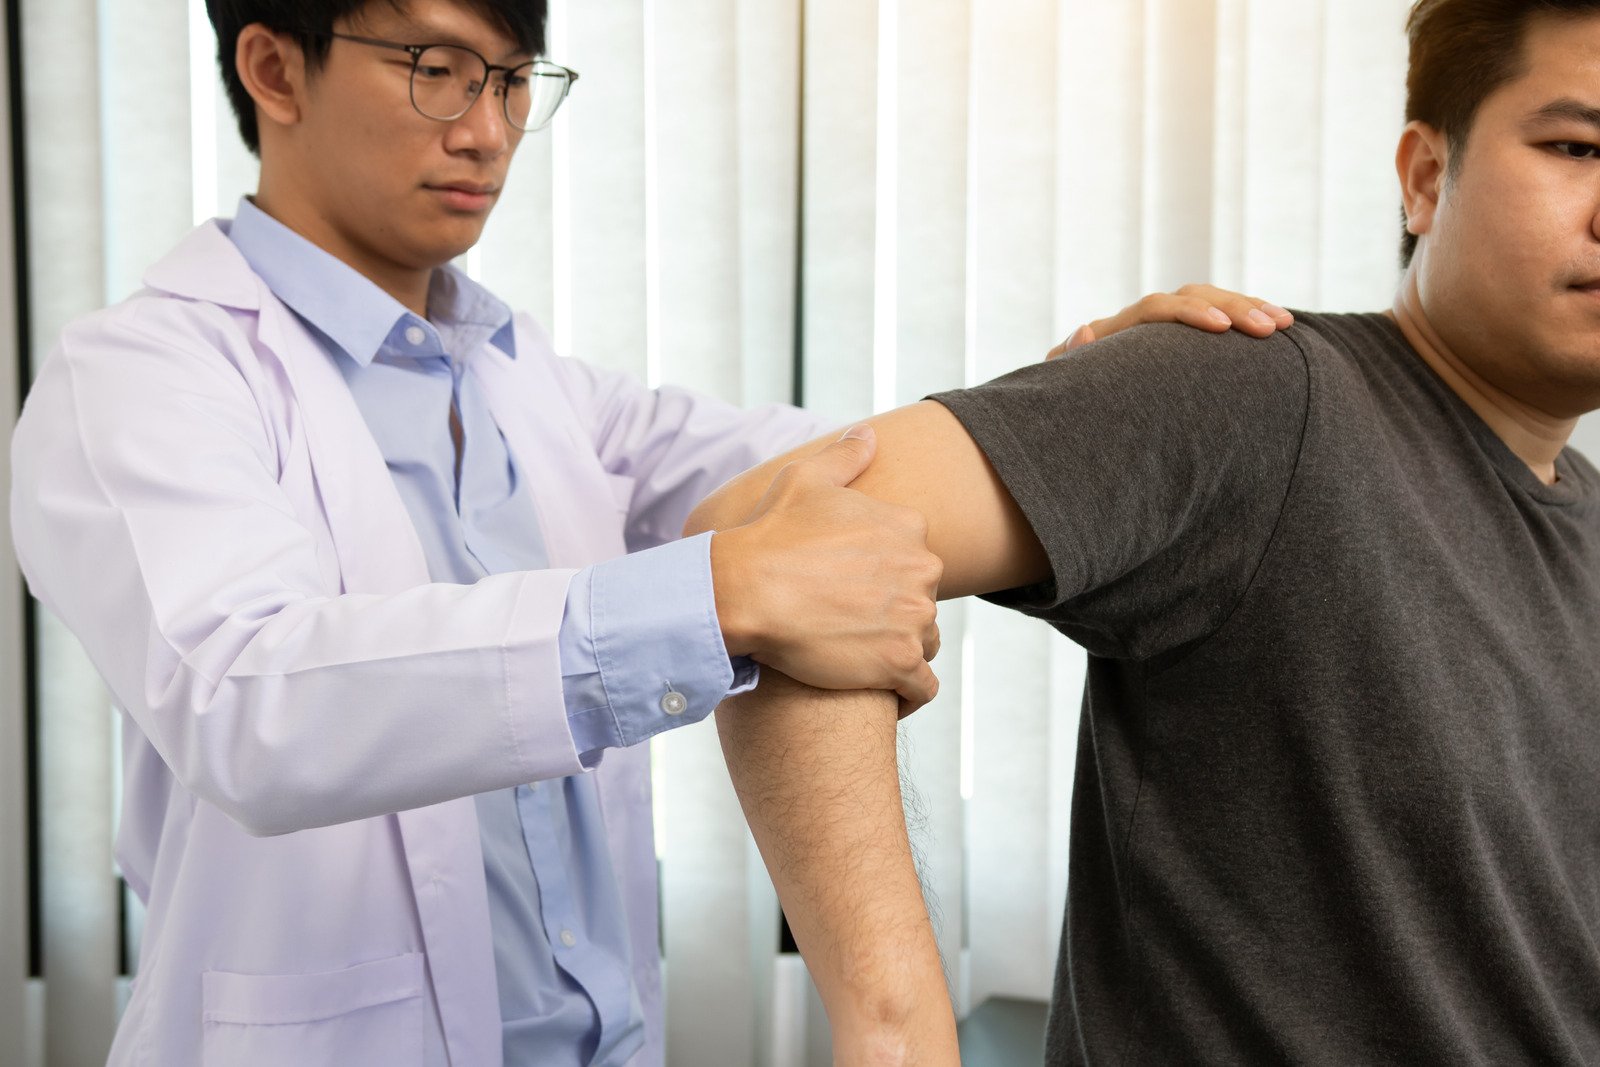 Shoulder and elbow paininjuries